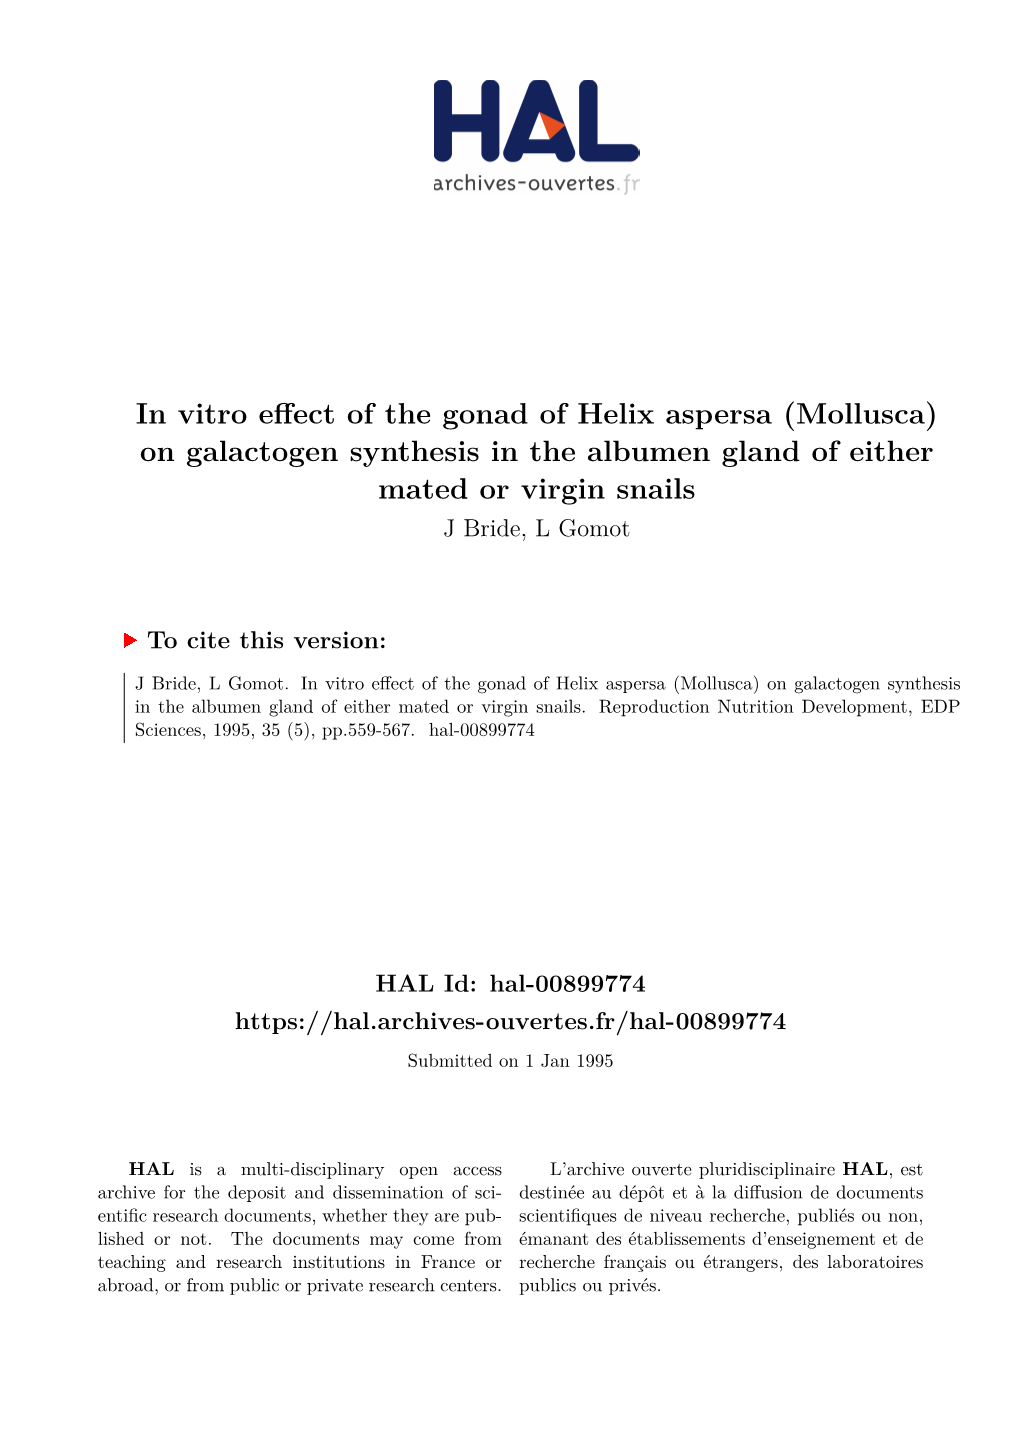 In Vitro Effect of the Gonad of Helix Aspersa (Mollusca) on Galactogen Synthesis in the Albumen Gland of Either Mated Or Virgin Snails J Bride, L Gomot